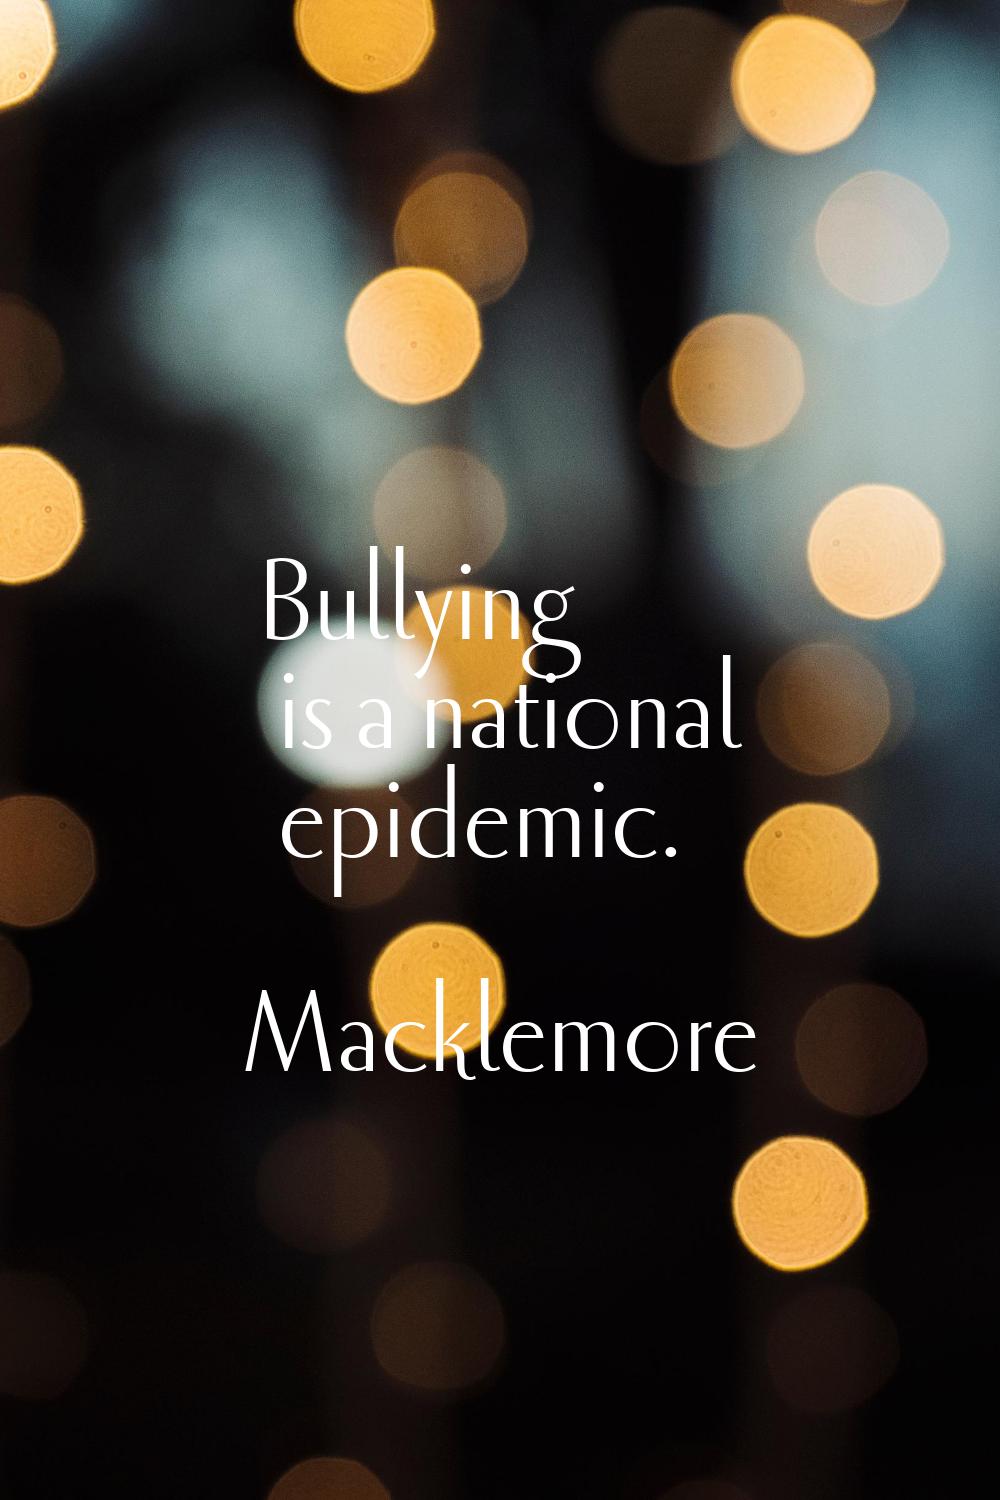 Bullying is a national epidemic.